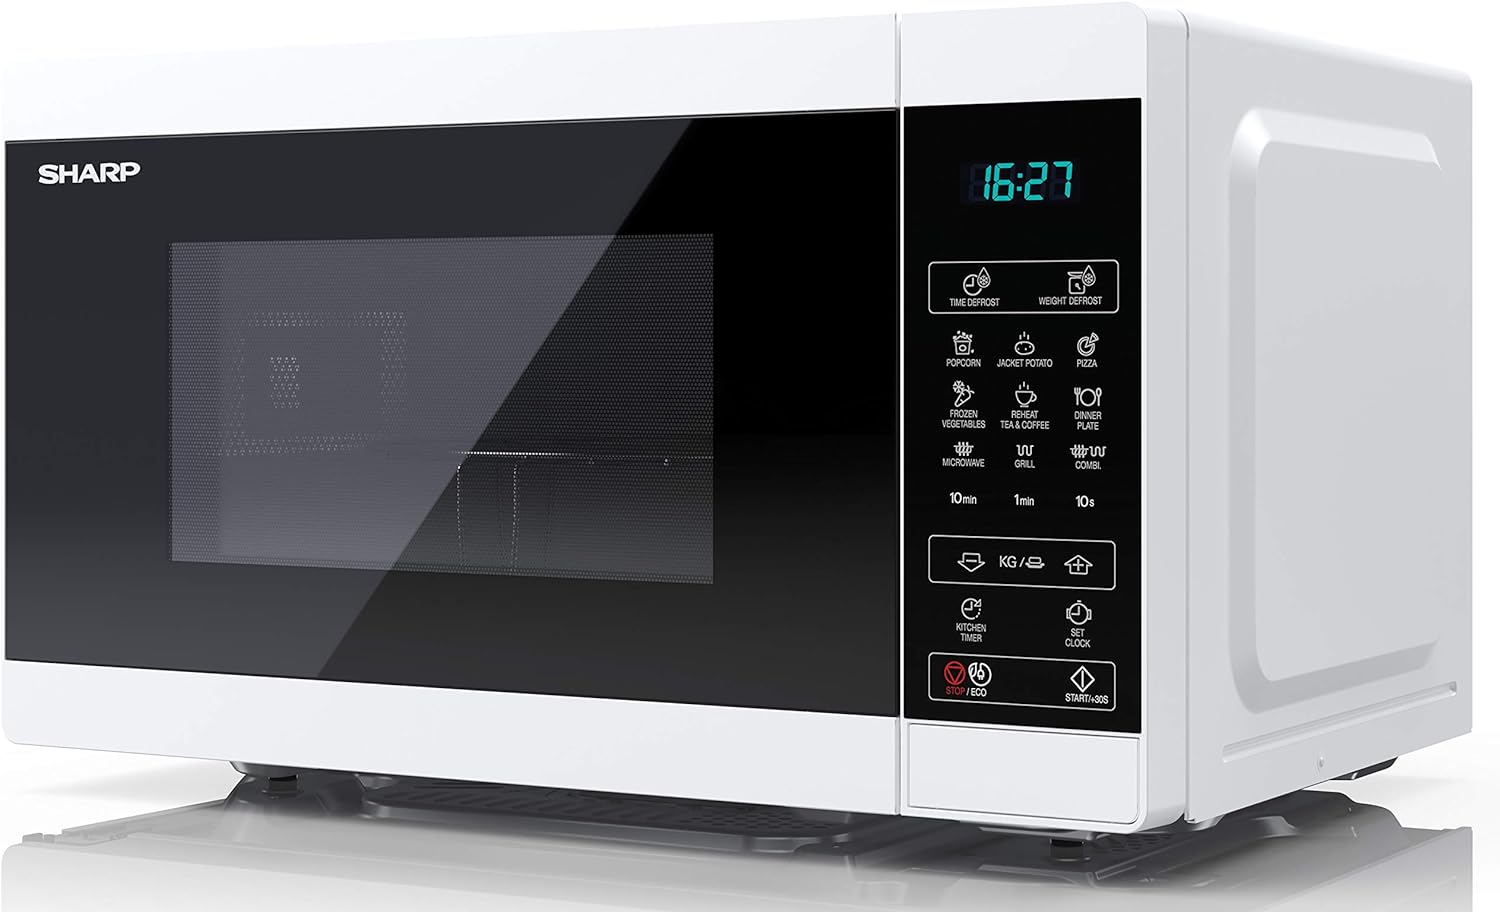 SHARP YC - MG02U - S Compact 20 Litre 800W Digital Microwave with 1000W Grill, 11 power levels, ECO Mode, defrost function, LED cavity light - Silver - Amazing Gadgets Outlet